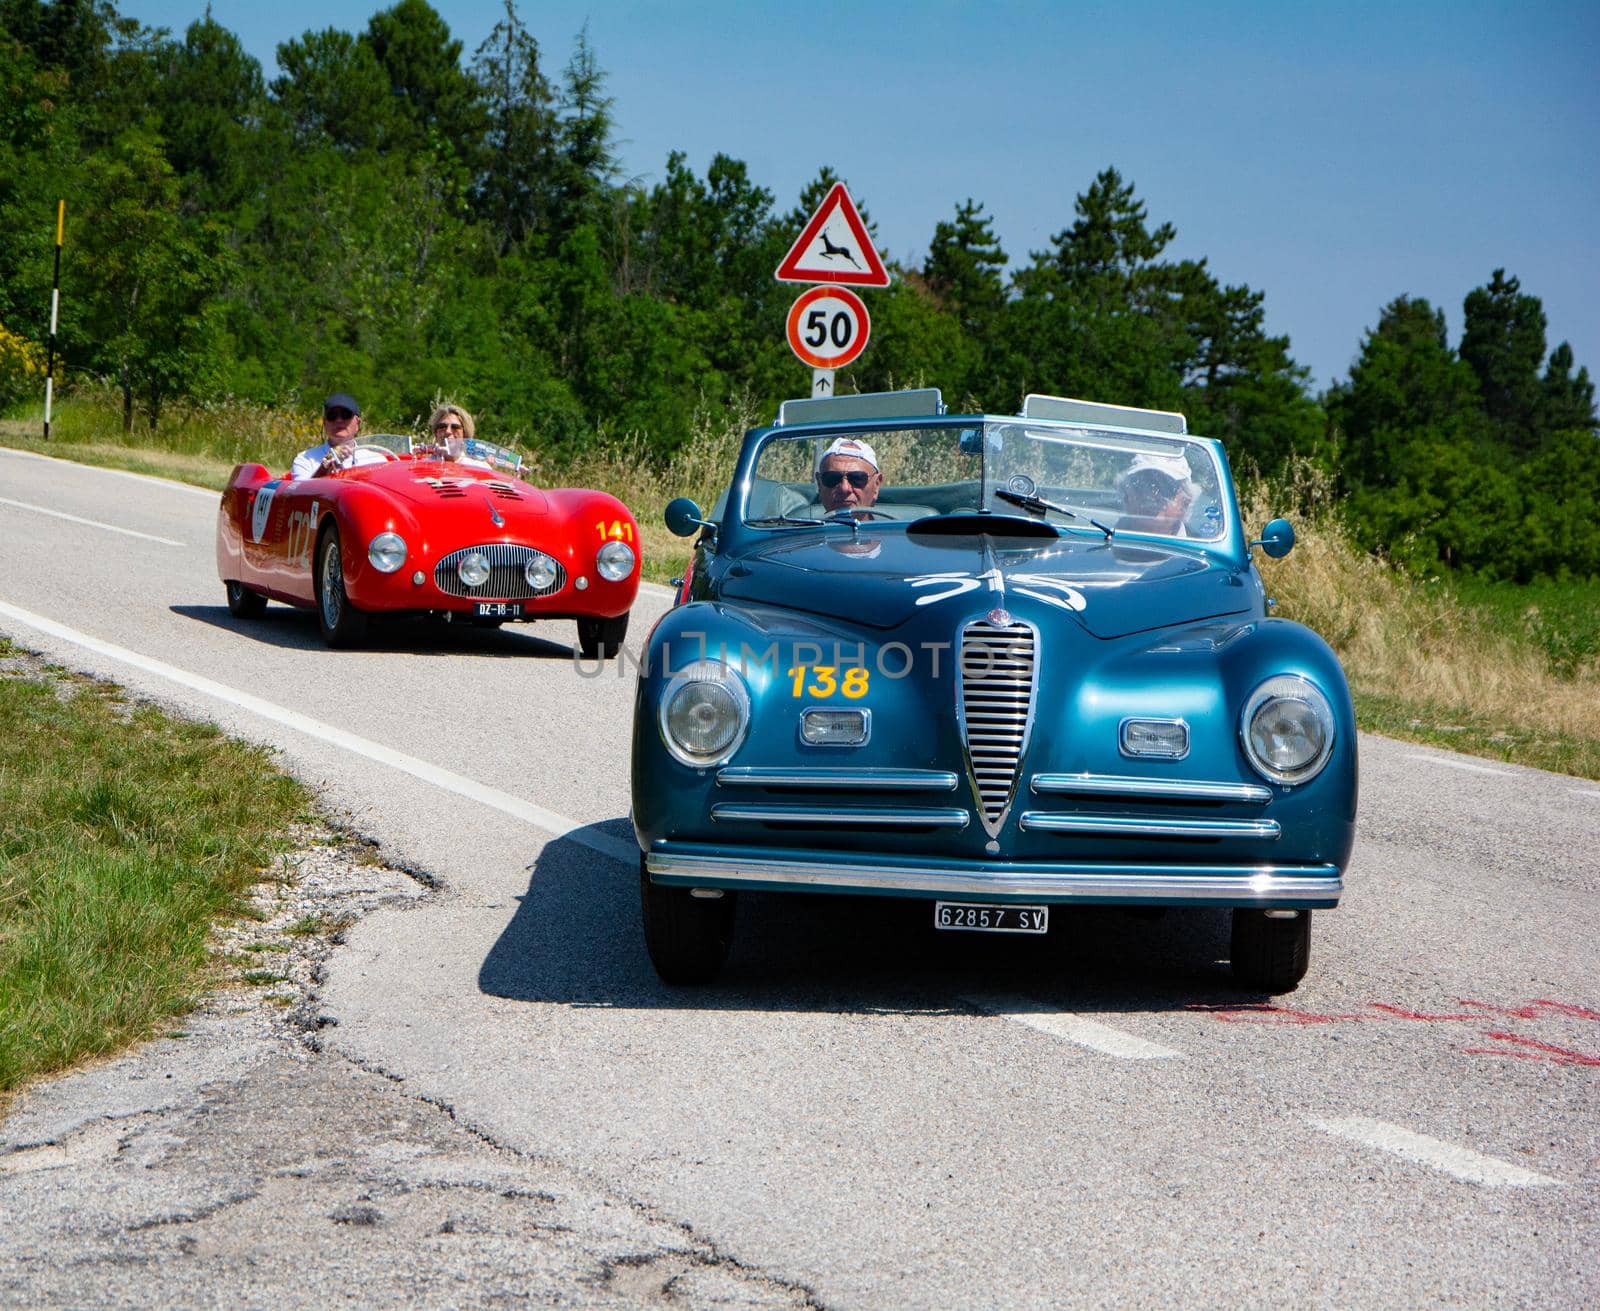 ALFA ROMEO 6C 2500 S CABRIOLET PININ FARINA 1947 on an old racing car in rally Mille Miglia 2022 the famous italian historical race (1927-1957 by massimocampanari